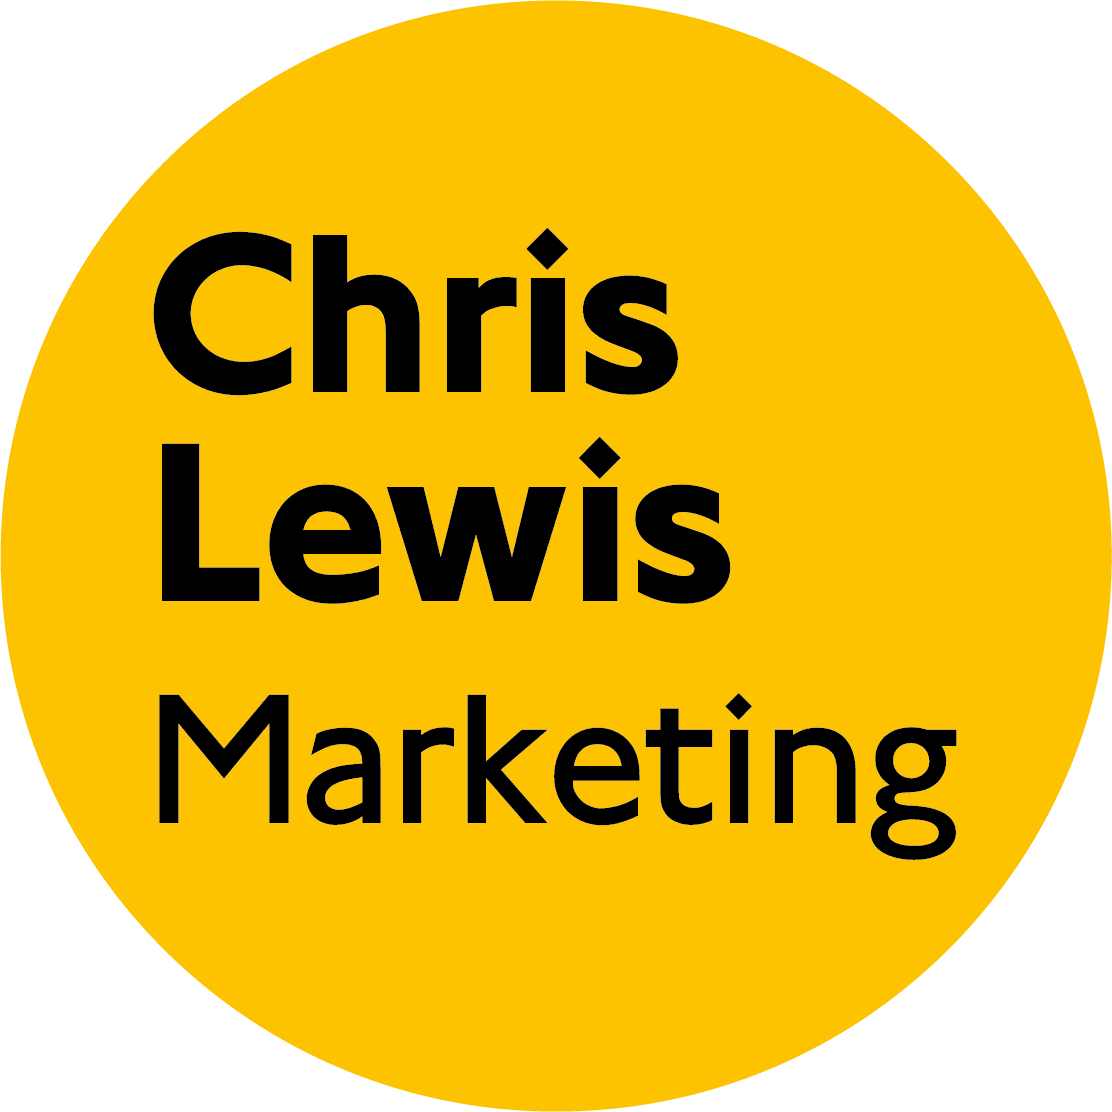 Chris Lewis Marketing logo with words "Chris Lewis Marketing" in bold black text on a yellow roundel background